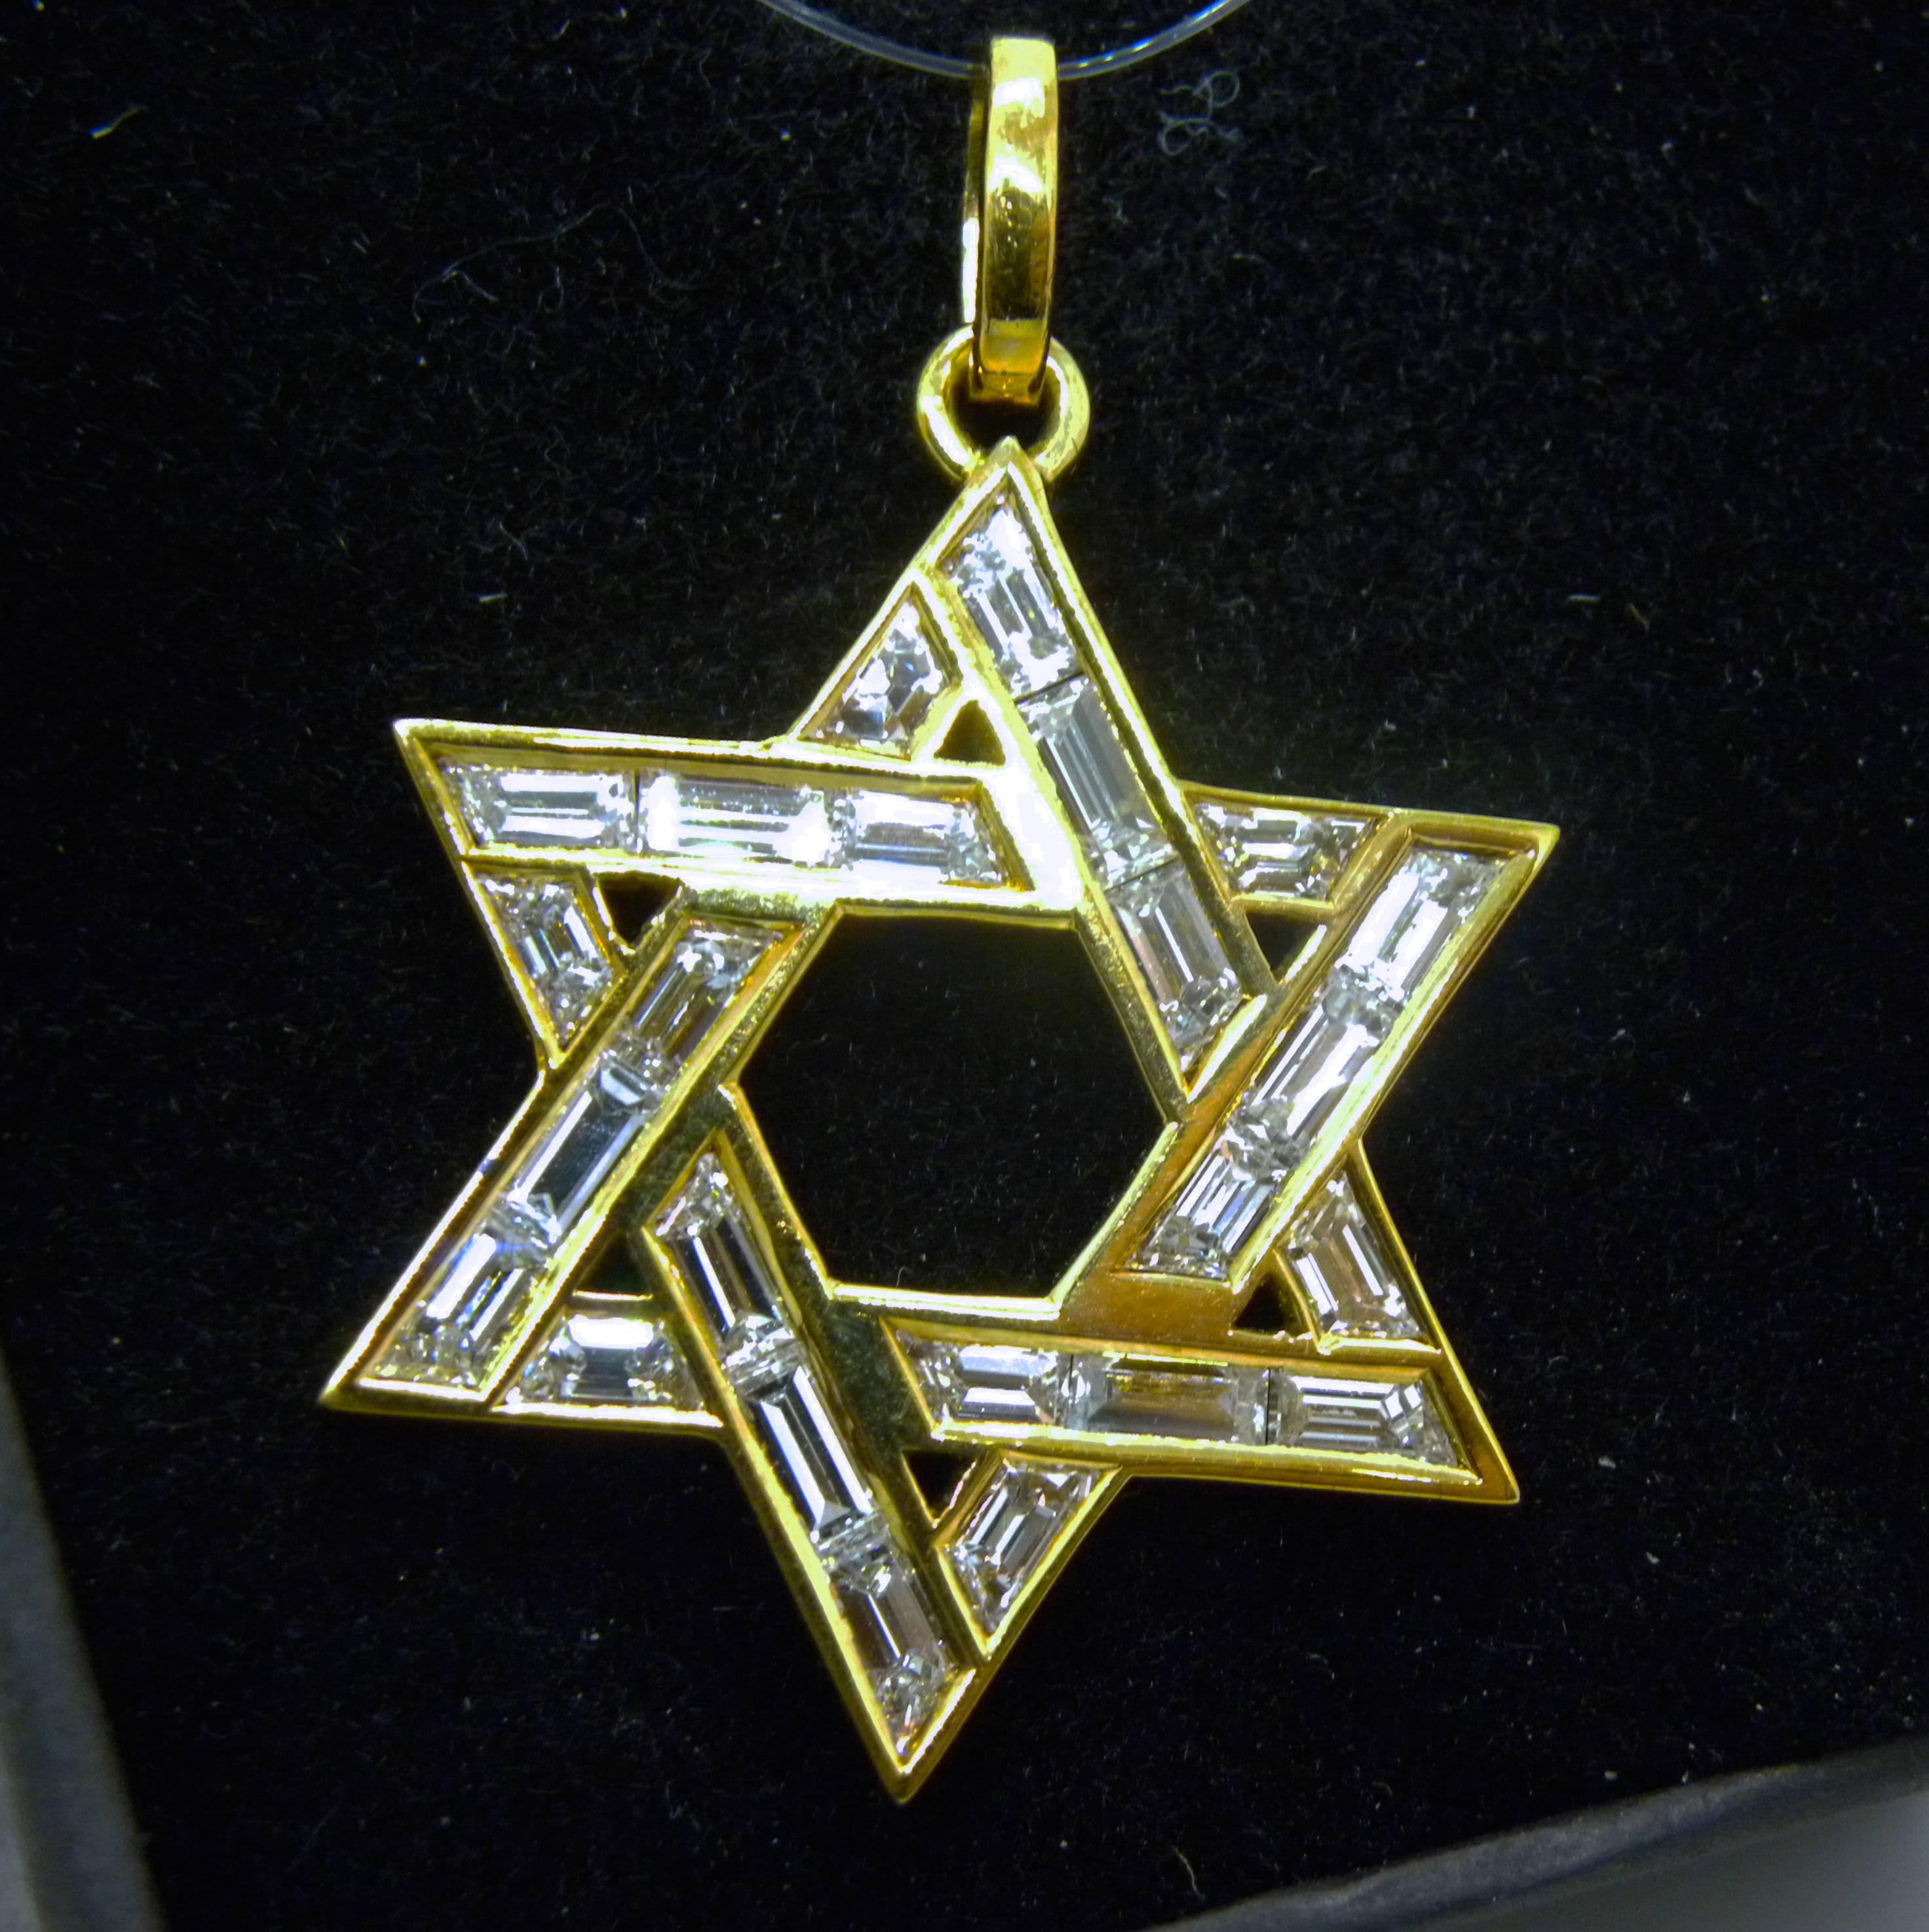 One-of-a-kind, Original Seventies Awesome Star of David Pendant featuring 2.97 Carat White Diamond Baguette Cut (D-E,IF Collection) in a 18 Carat Yellow Gold Setting.
In our fitted Burgundy Leather Case
A detailed gemological certificate is